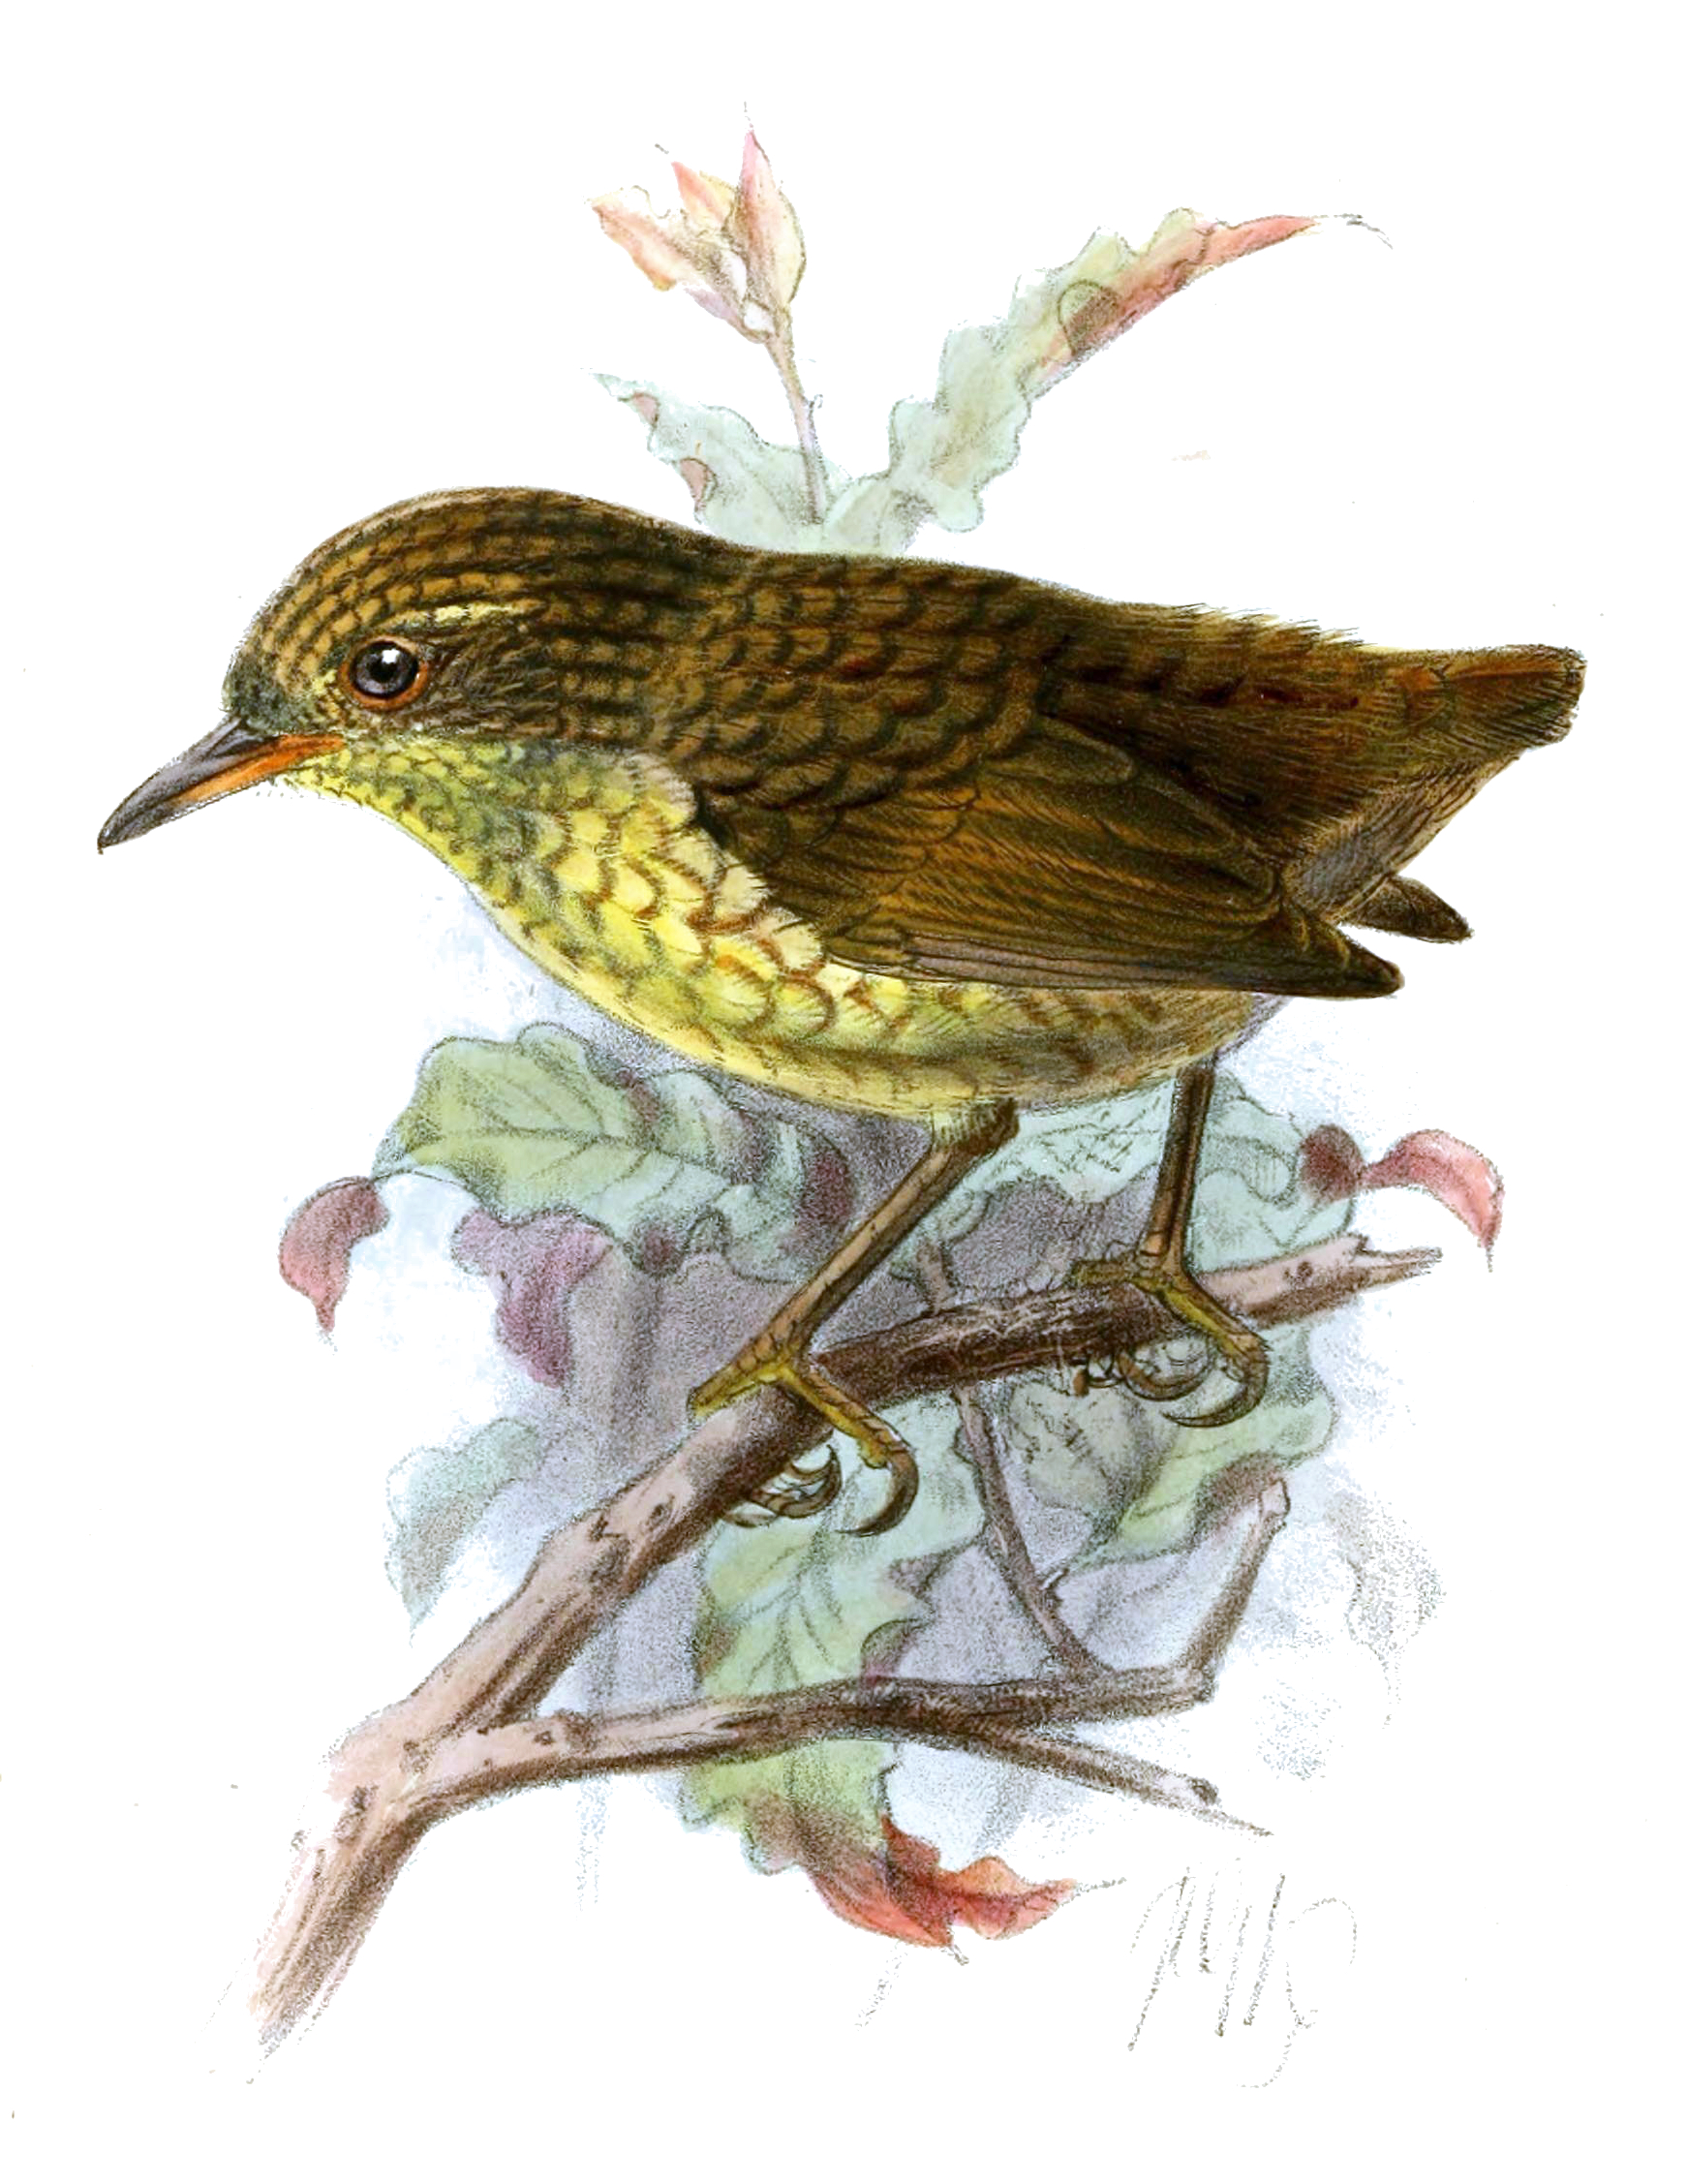 Stephens Island wren 'Xenicus_lyalli,' olive-brown bird, with a yellow breast and a yellow stripe above its eye; illustration by John Gerrard Keulemans